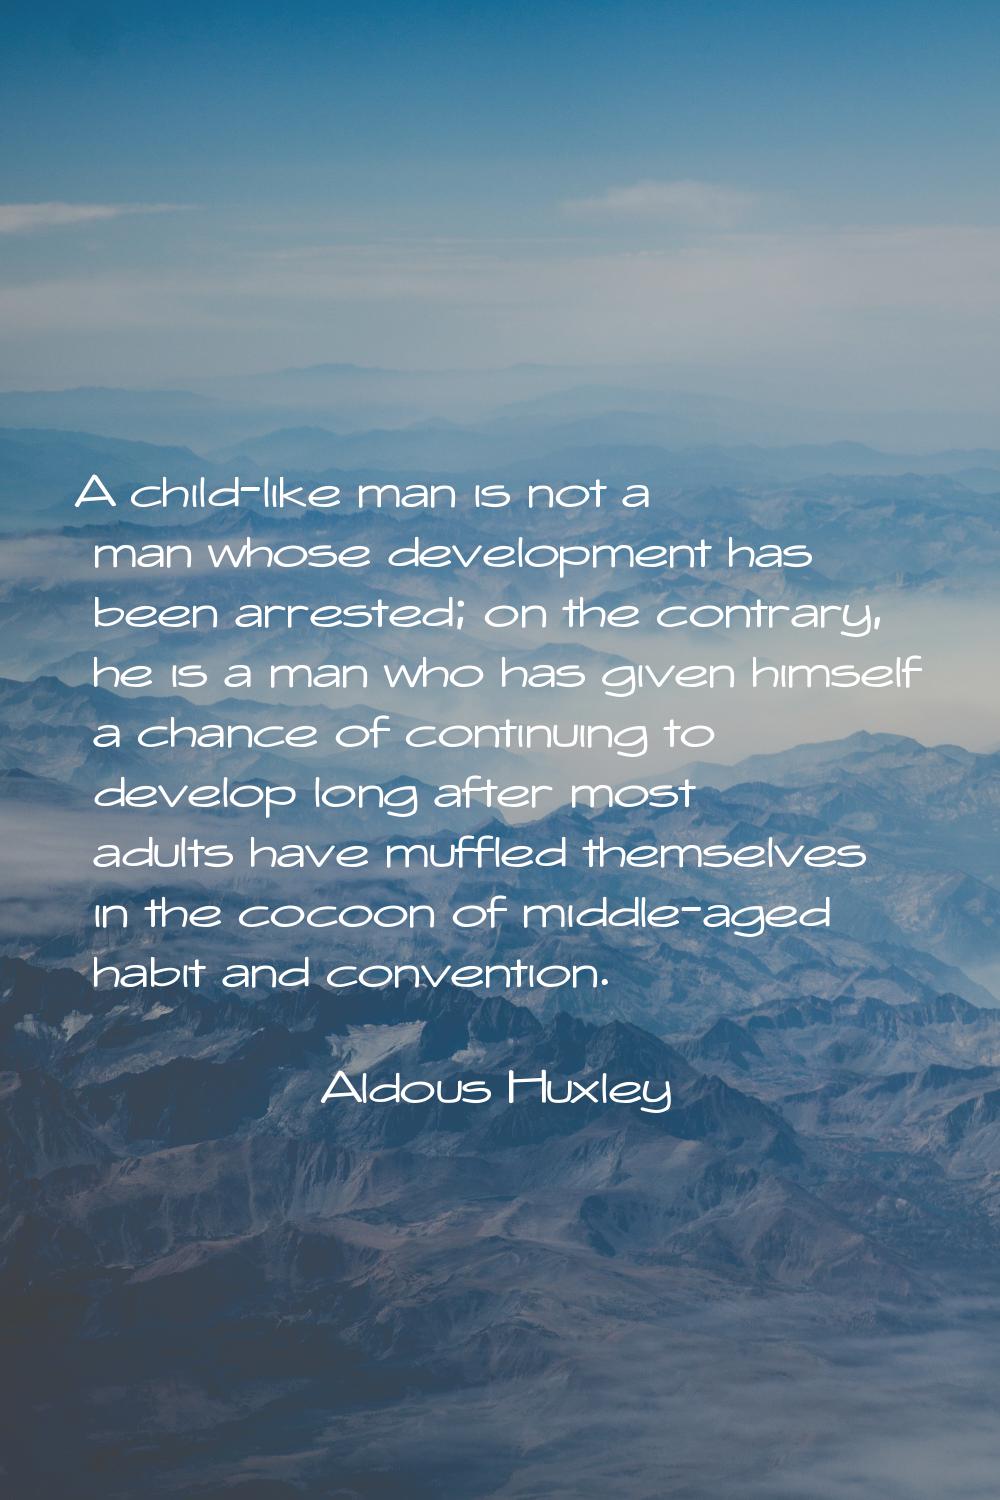 A child-like man is not a man whose development has been arrested; on the contrary, he is a man who